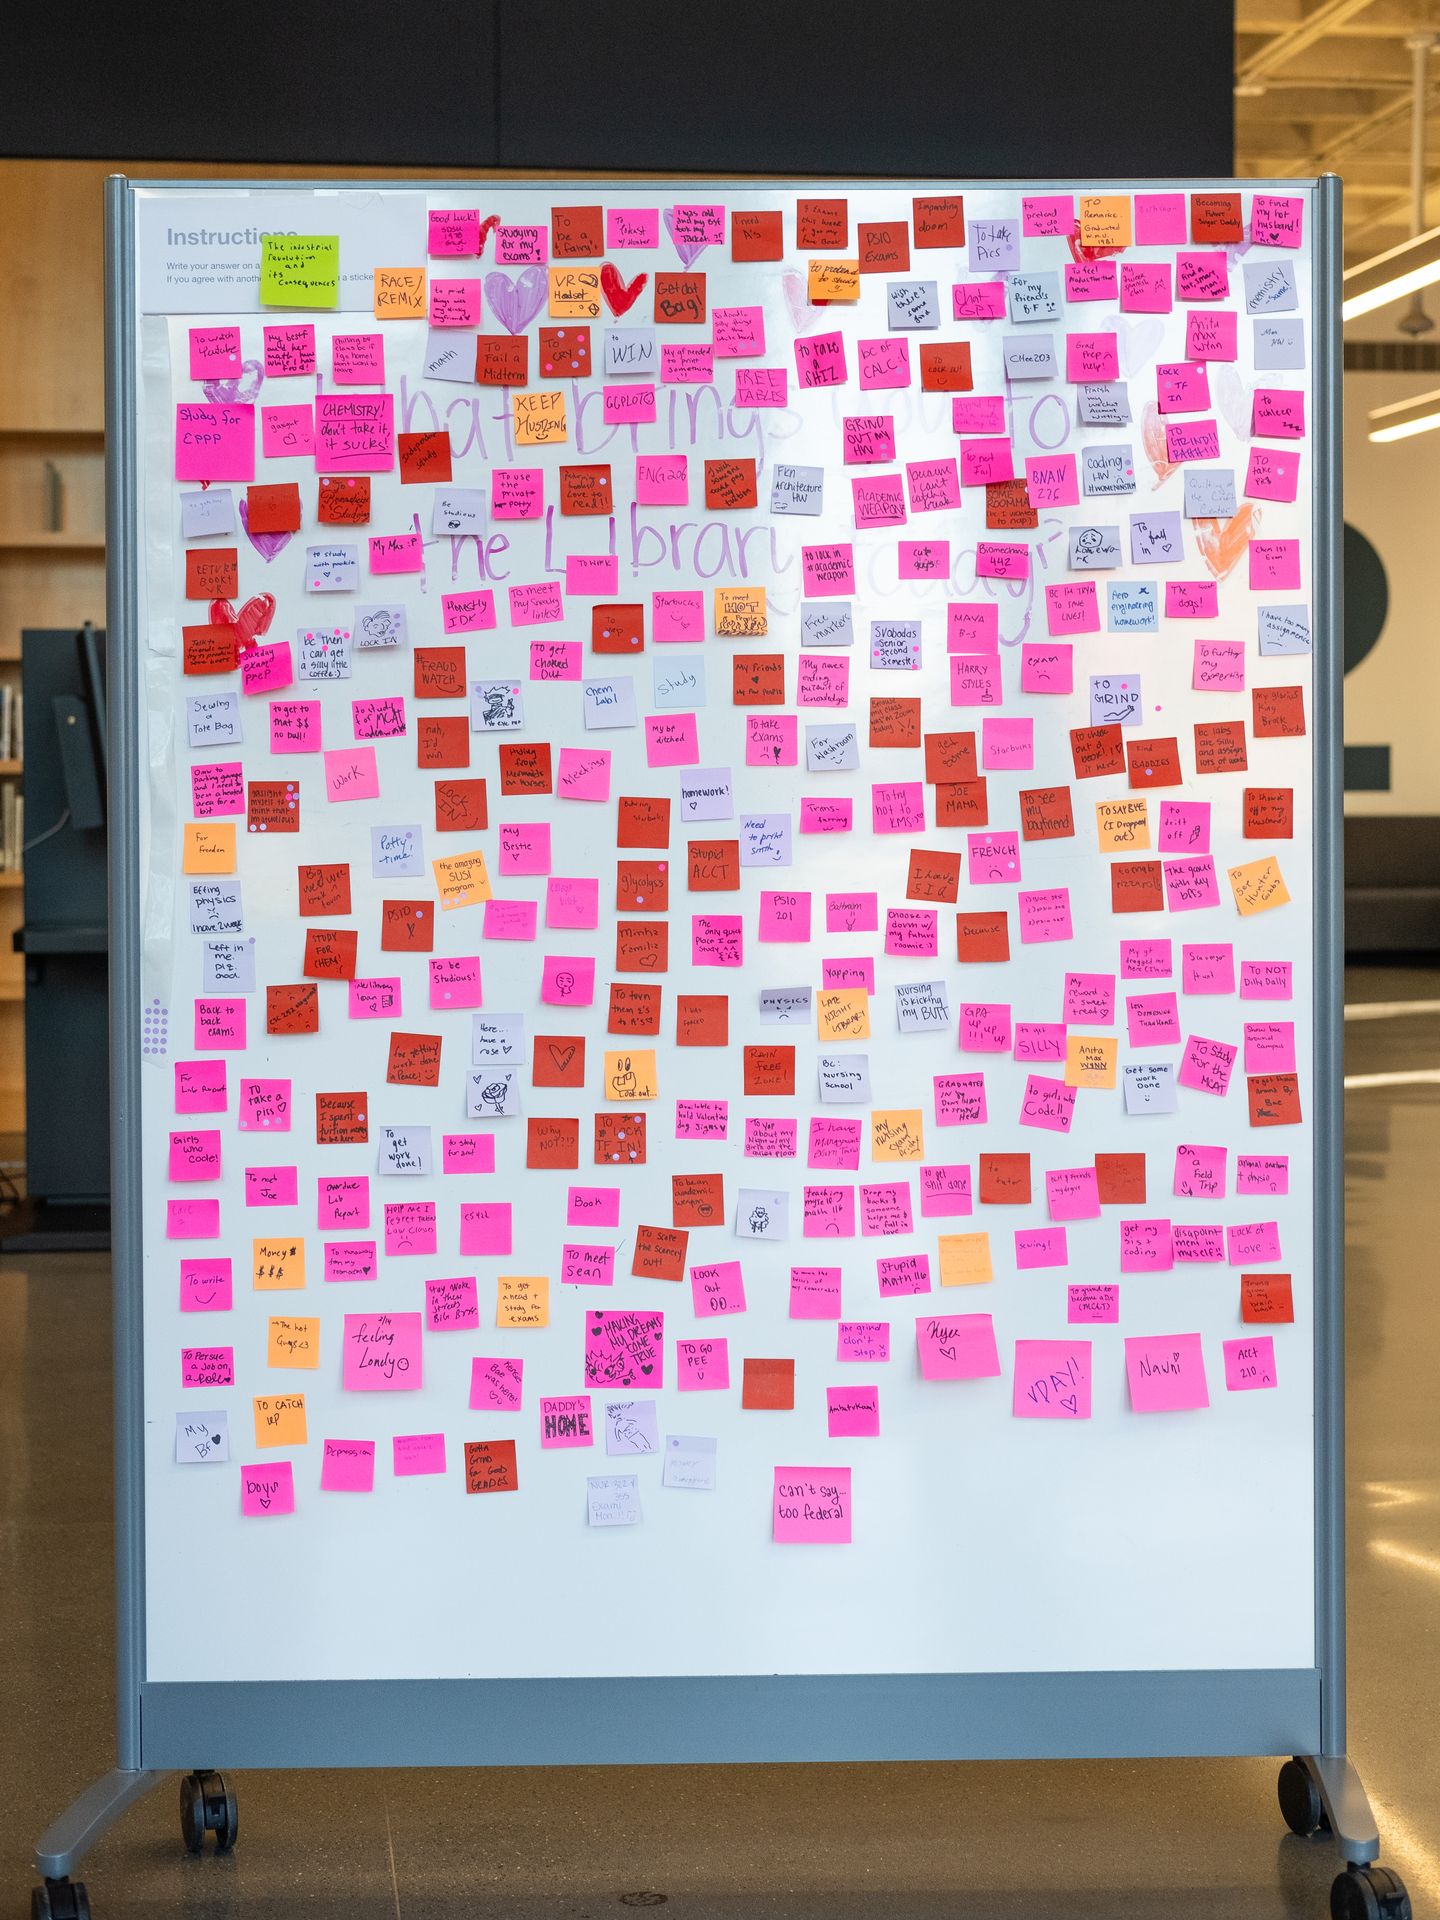 A whiteboard in an open space covered by pink and red sticky notes